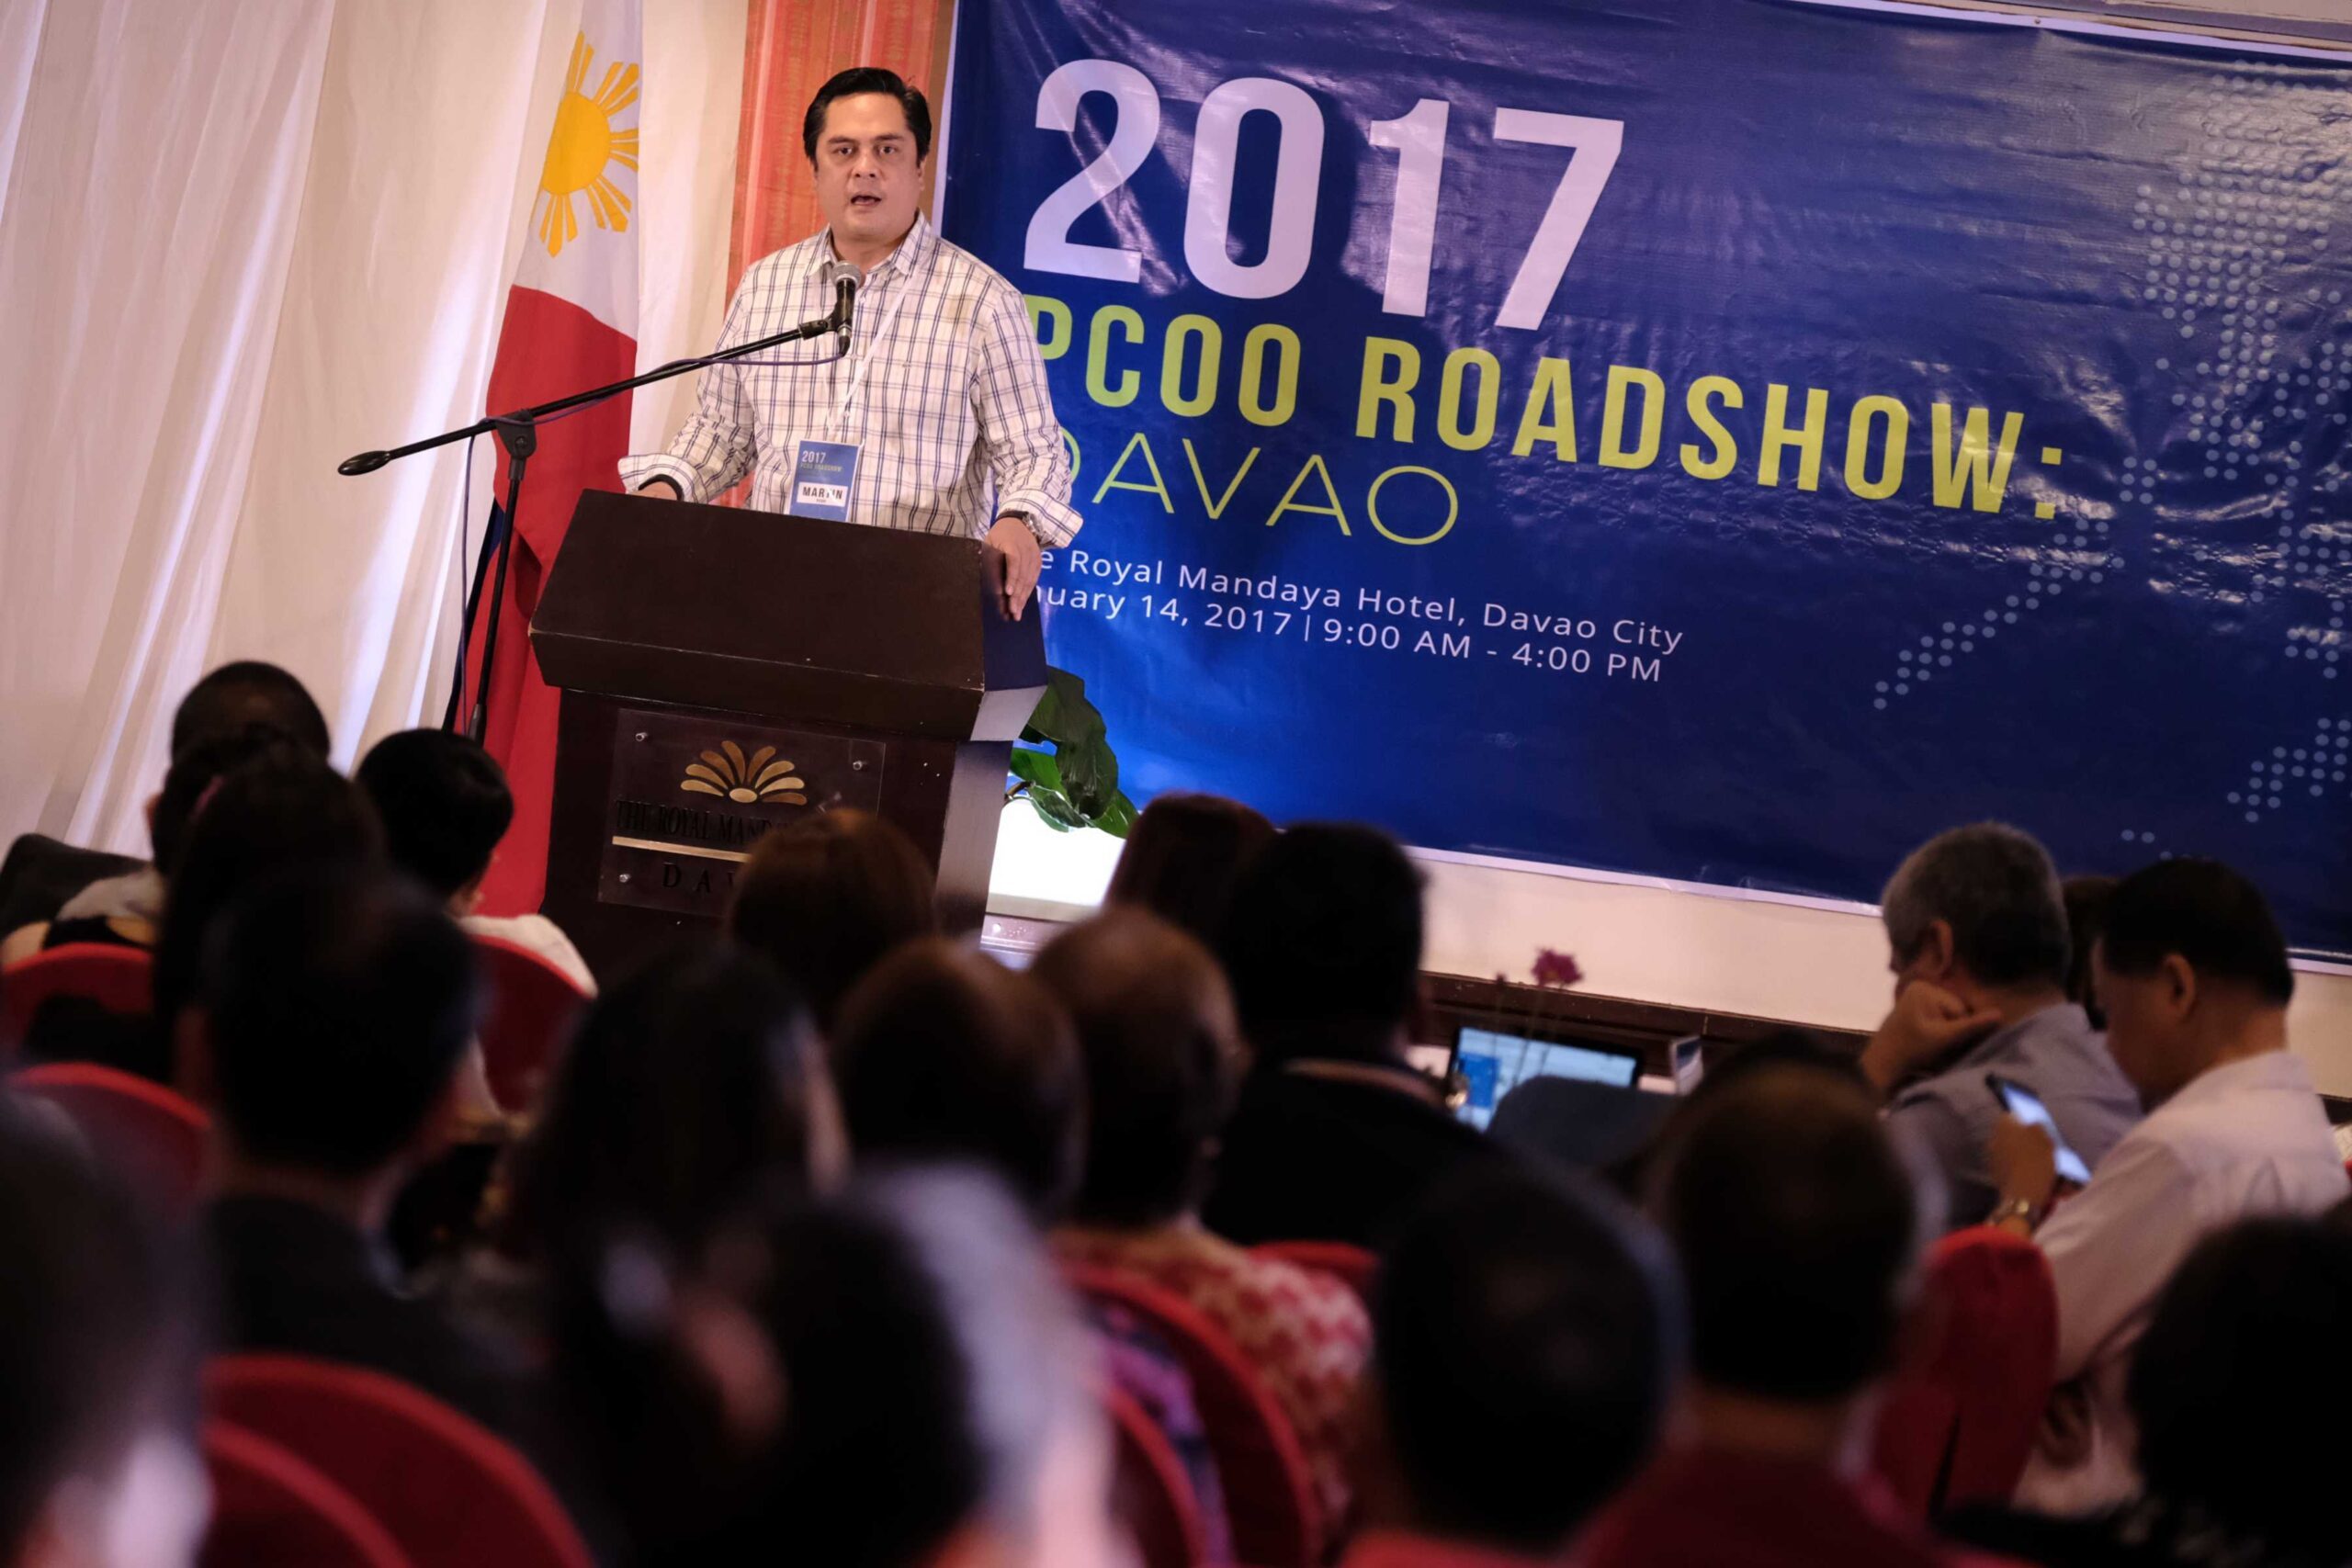 PCOO expenses up by 700%: Spending increased in travels, rentals, internet